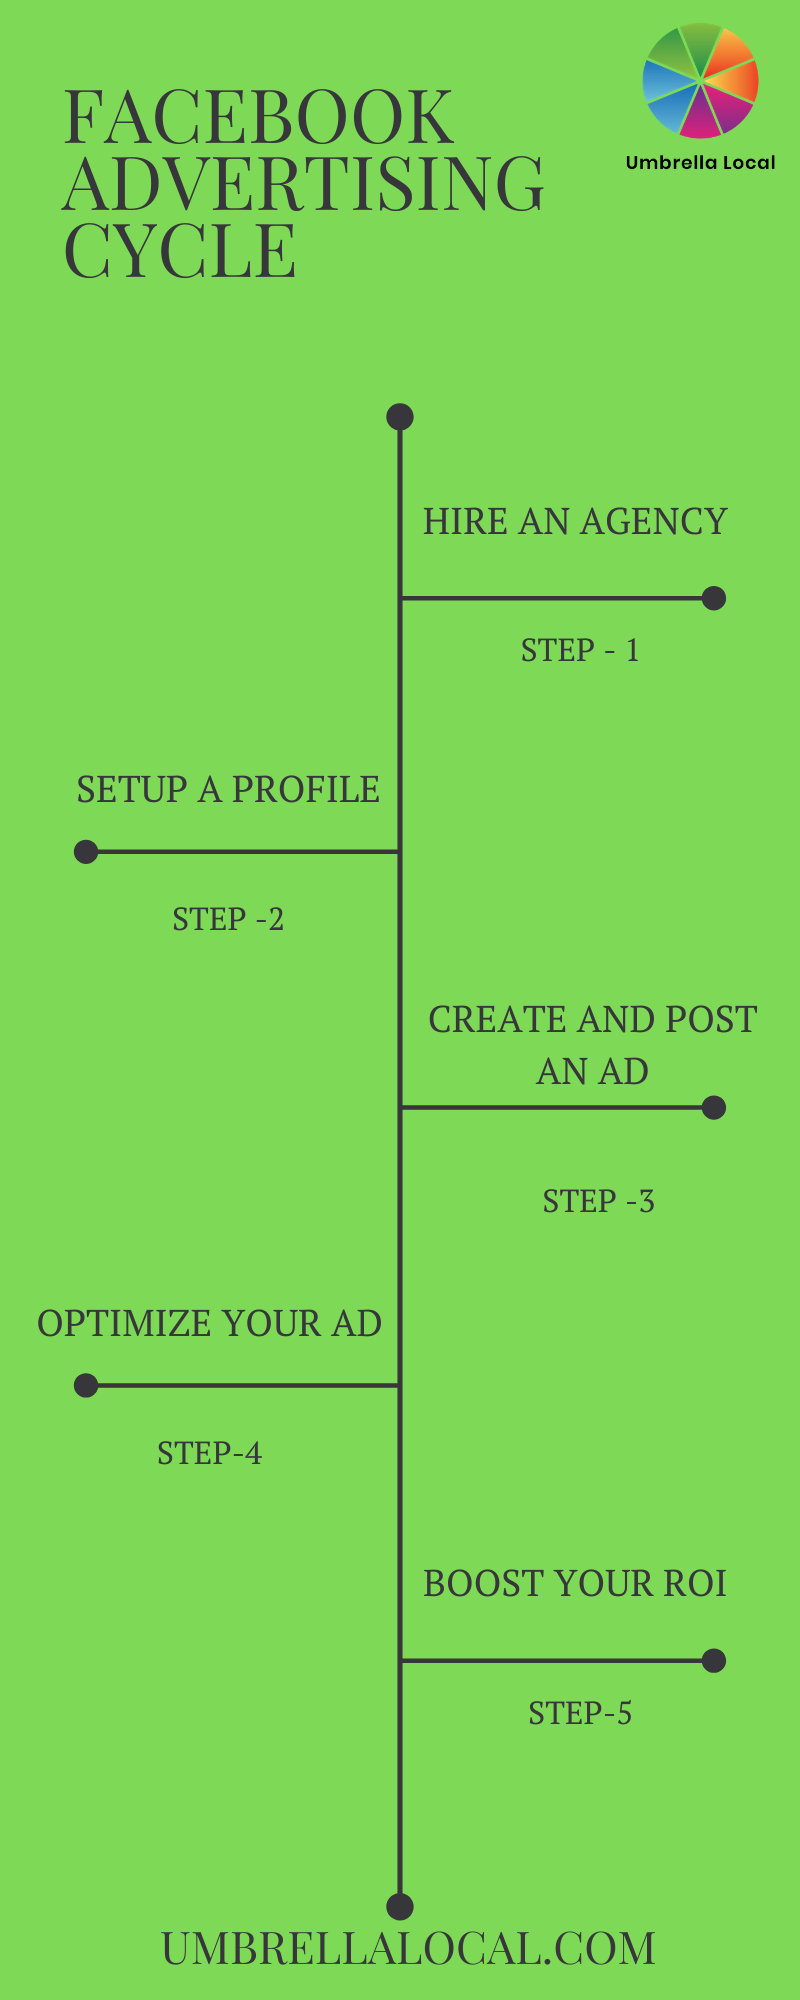 Facebook Advertising Cycle Infographic